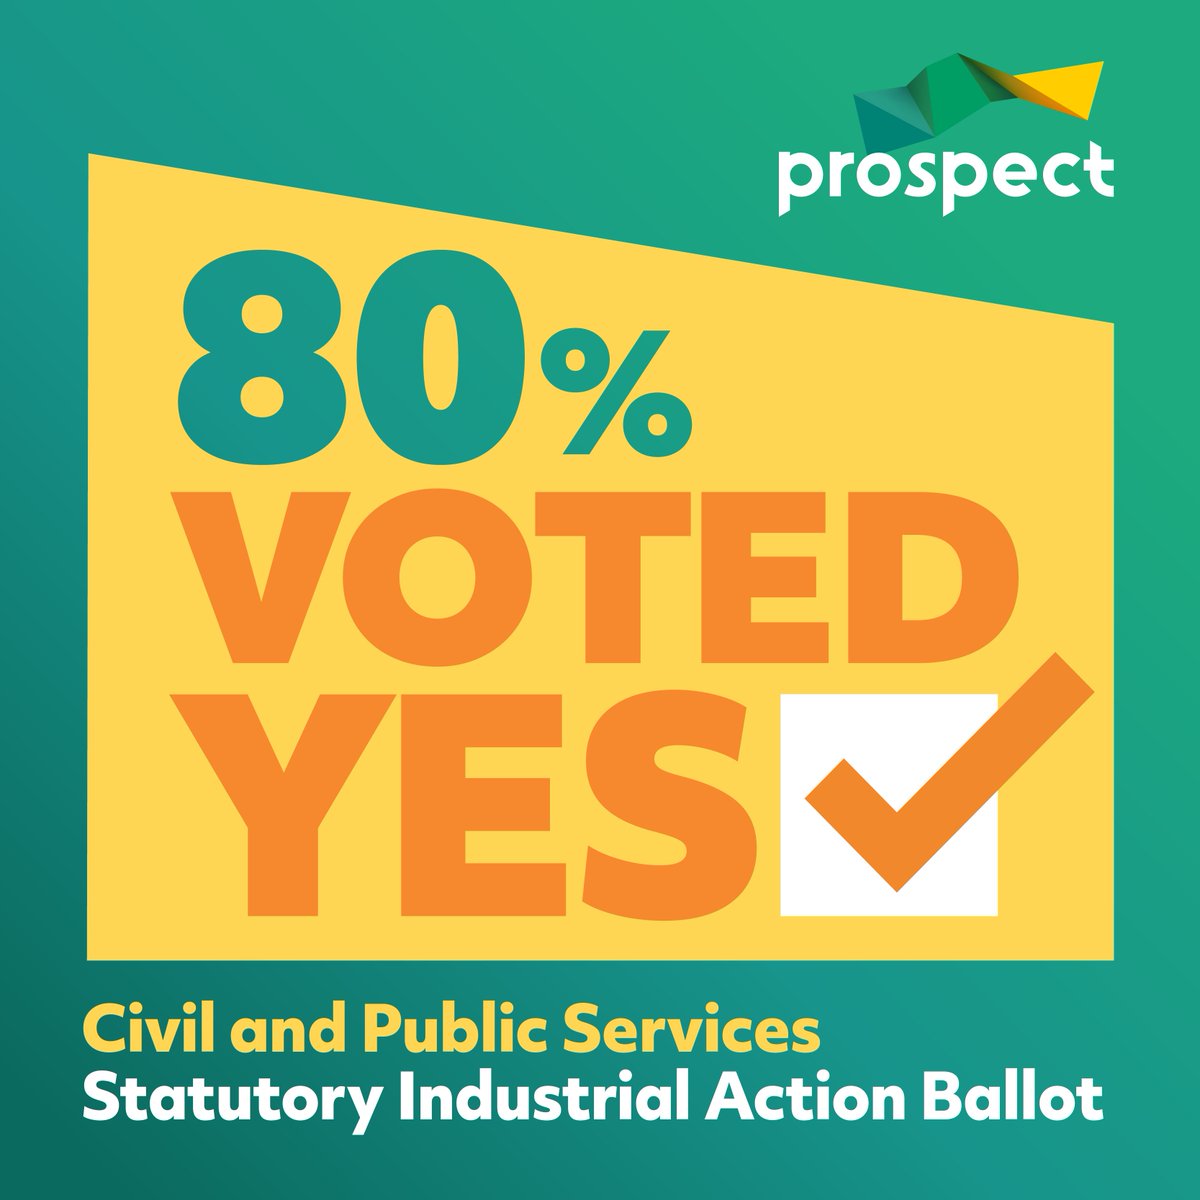 🚨 Breaking: Prospect members in the public services sector have voted for industrial action. 80% voted to strike 🗳️ Strike action will take place on 15 March 🪧